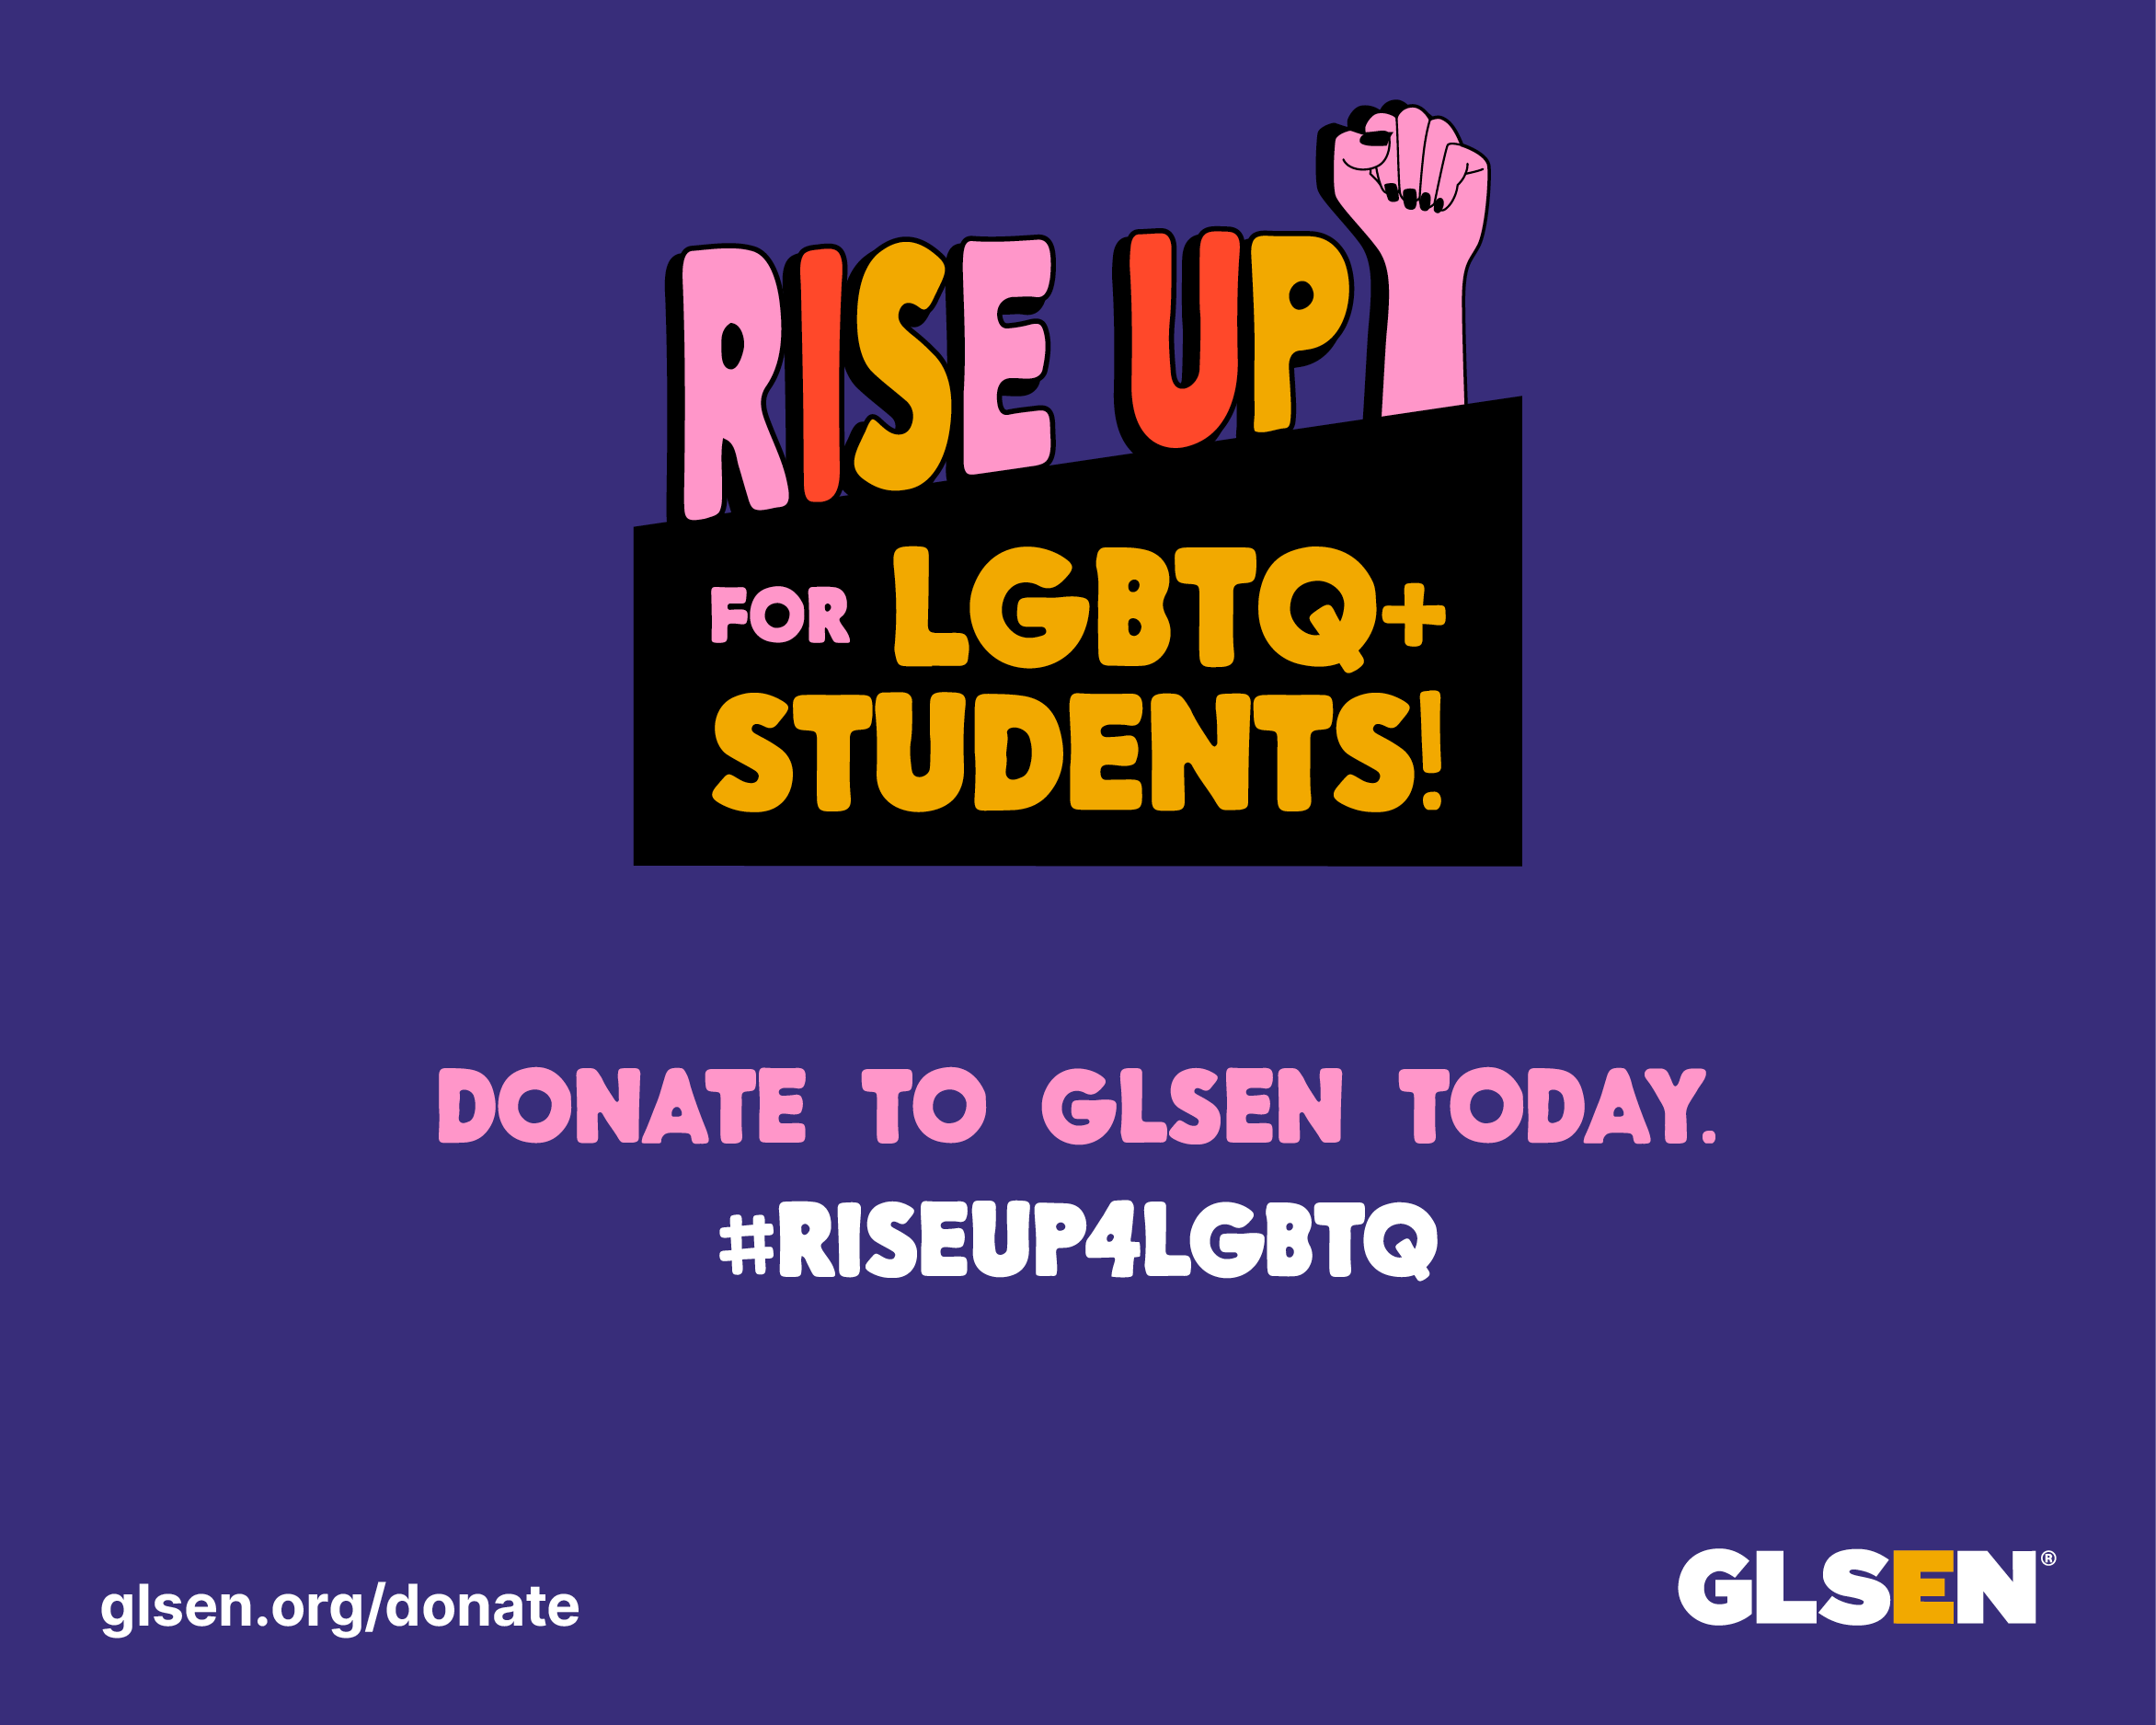 Rise Up for LGBTQ+ students! Donate to GLSEN today. #RiseUp4LGBTQ 